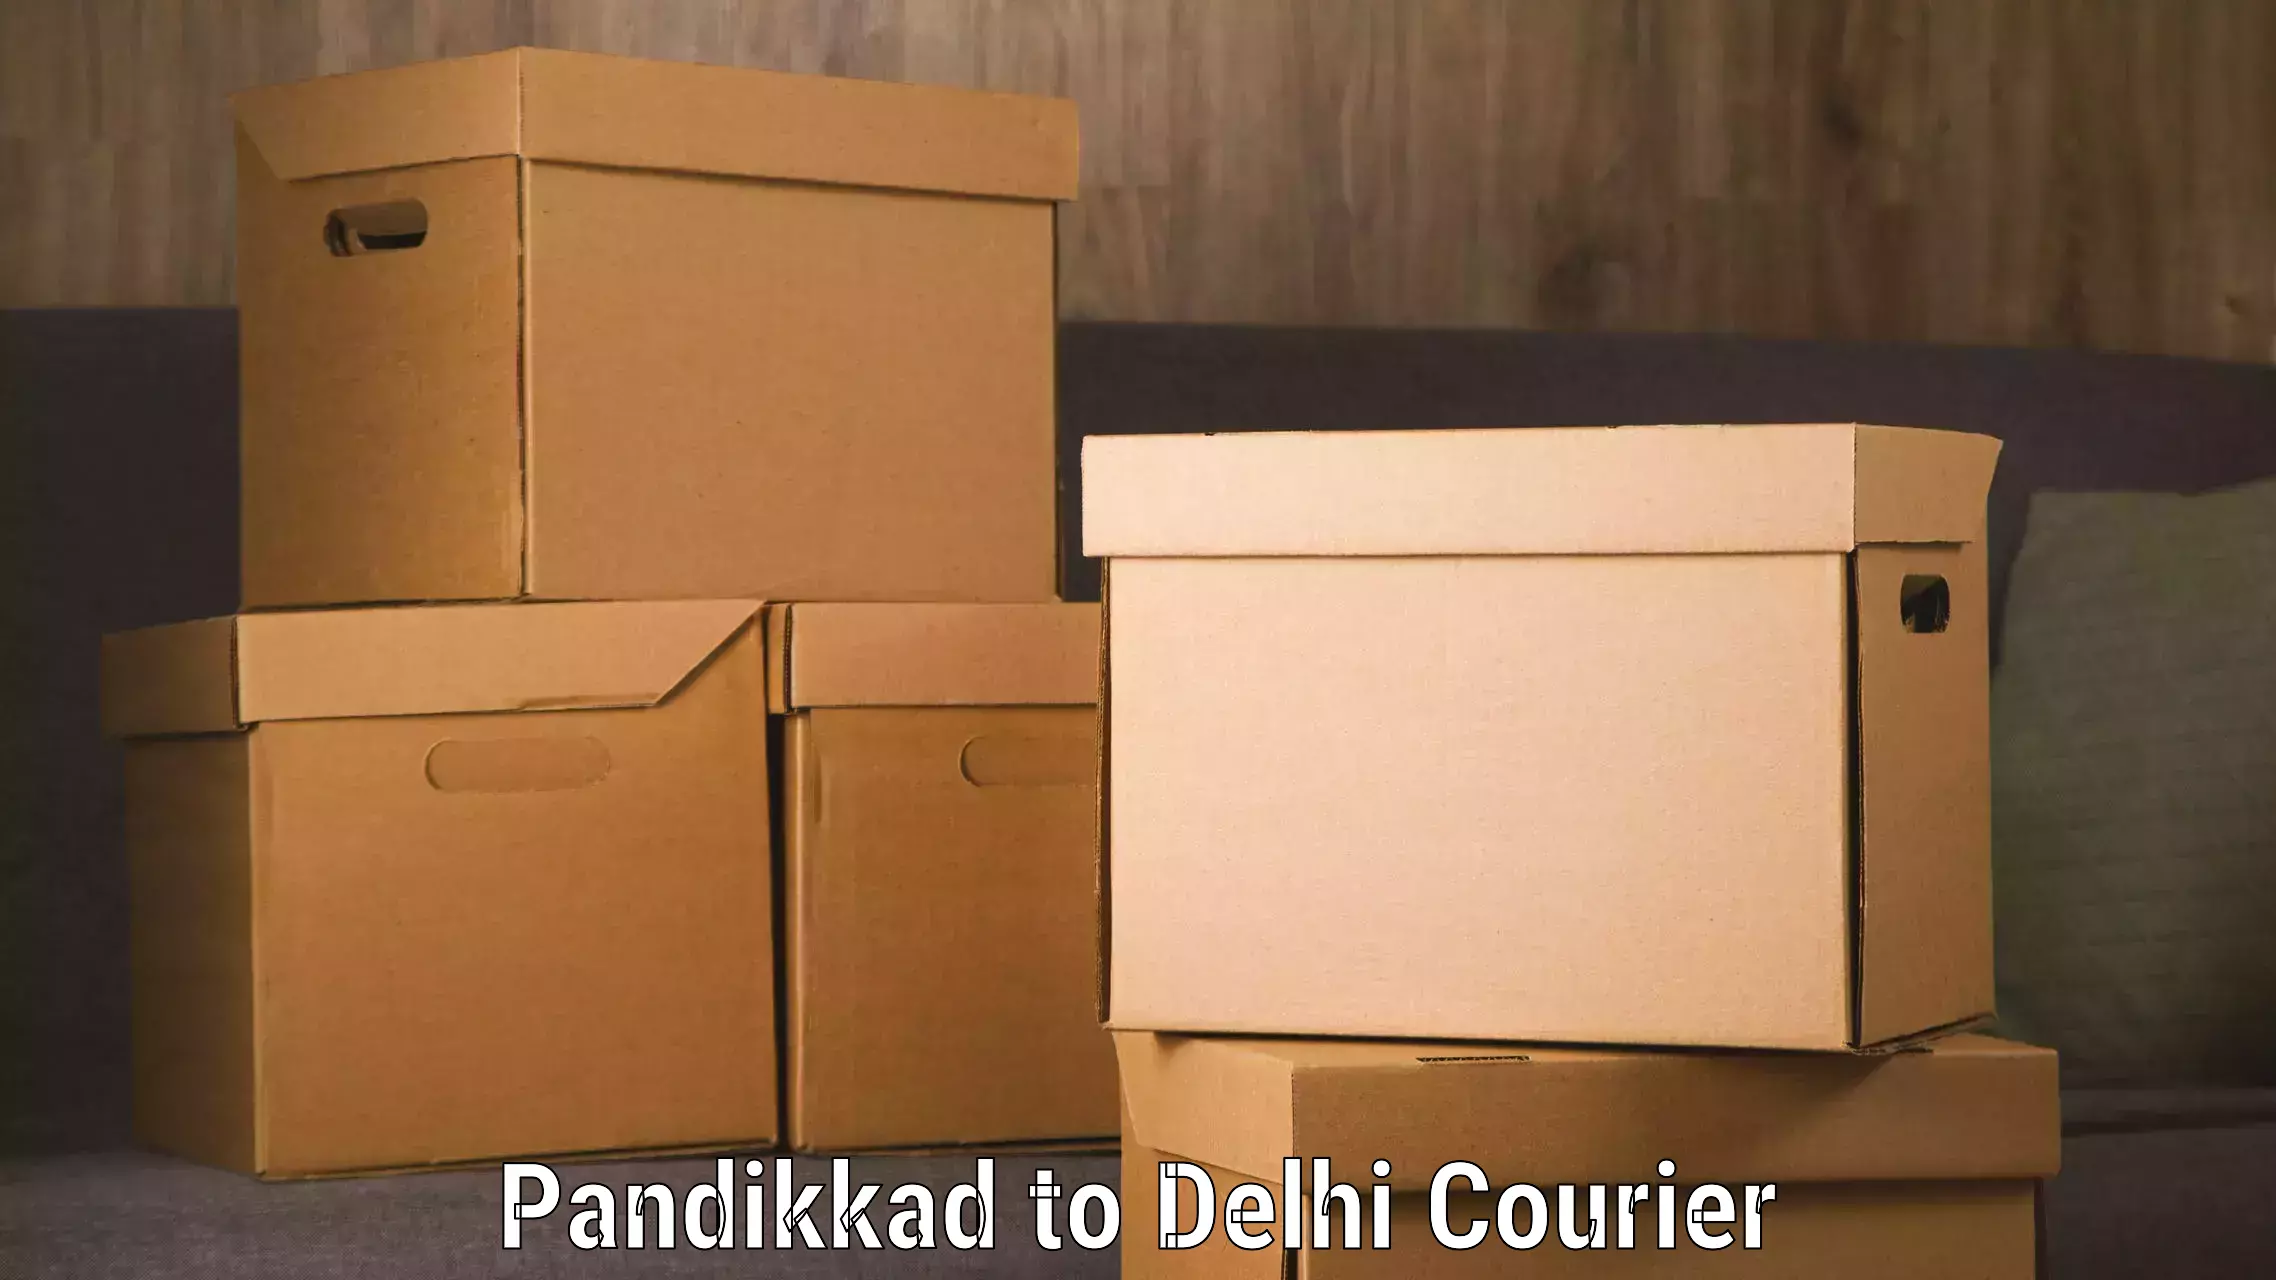 Multi-package shipping in Pandikkad to Delhi